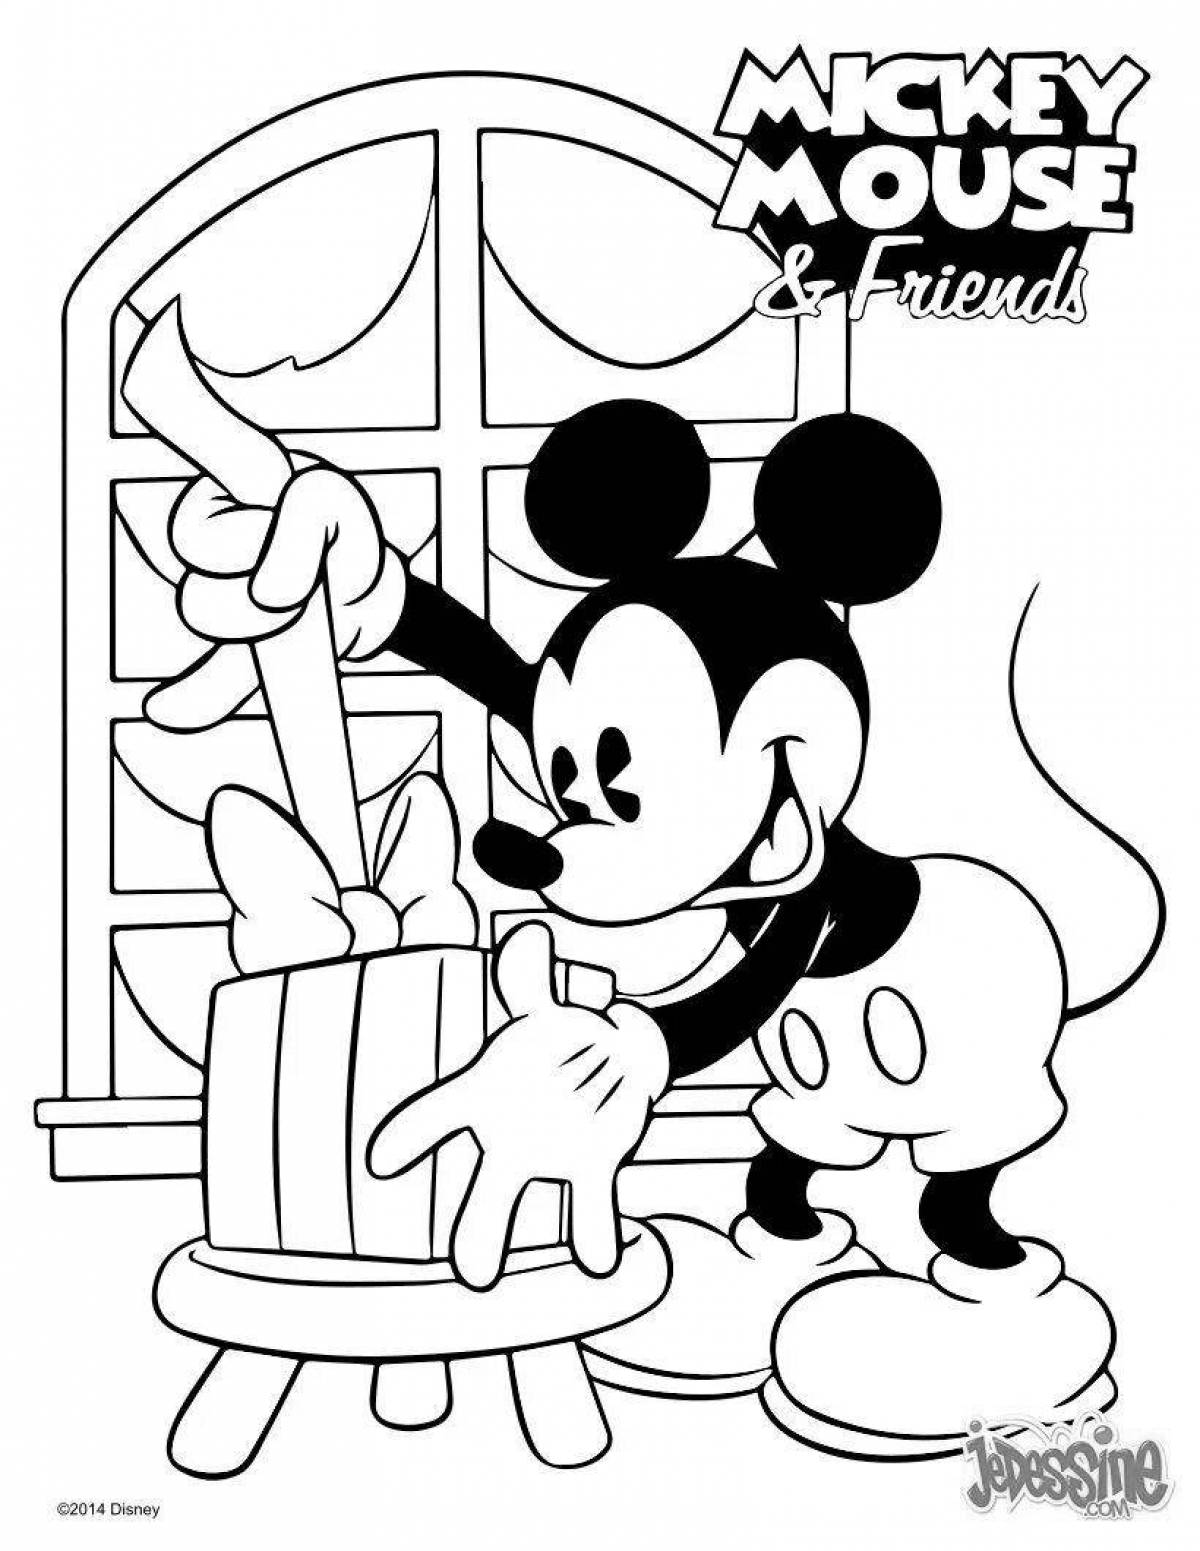 Magic Mickey Mouse Christmas coloring book